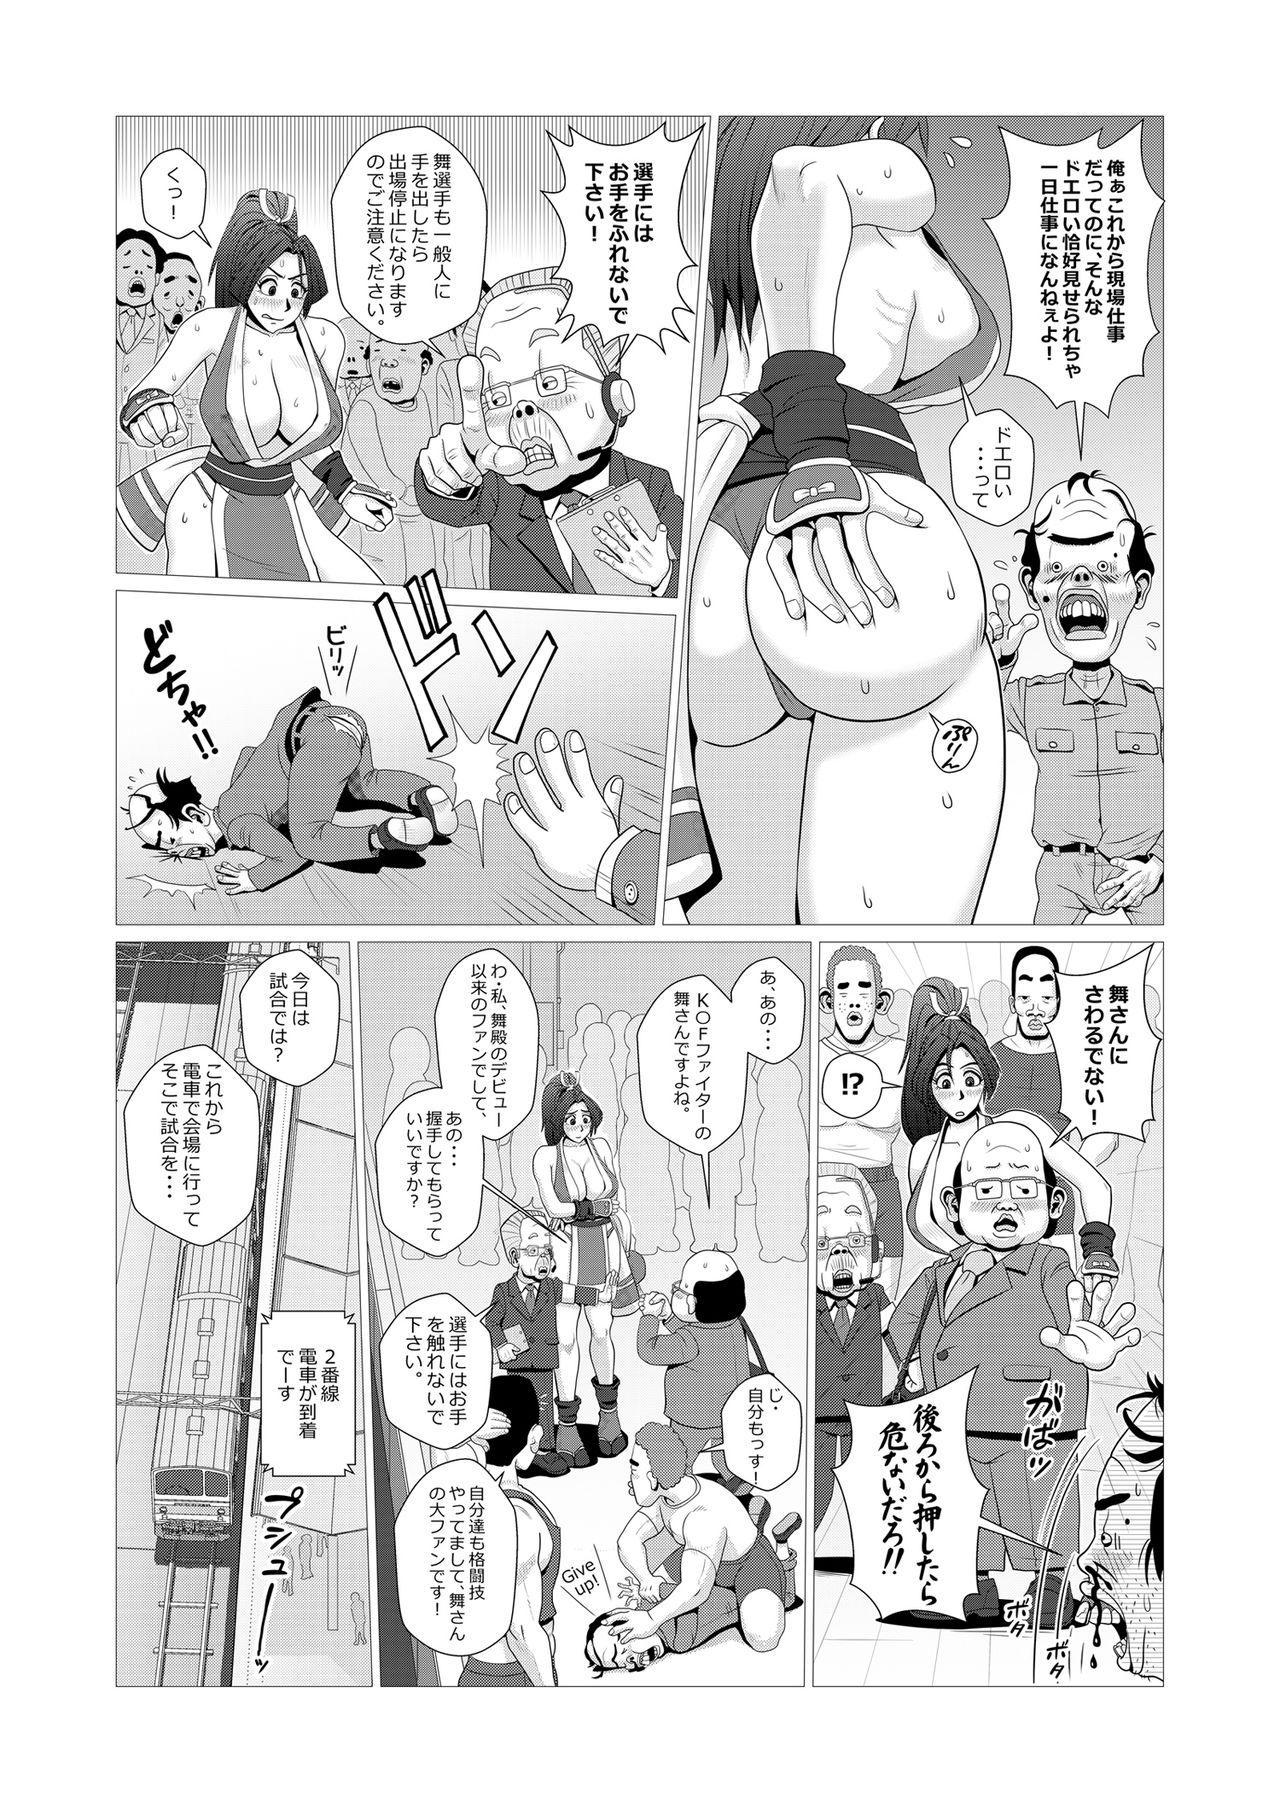 Mexican Maidono no San - King of fighters Danish - Page 6